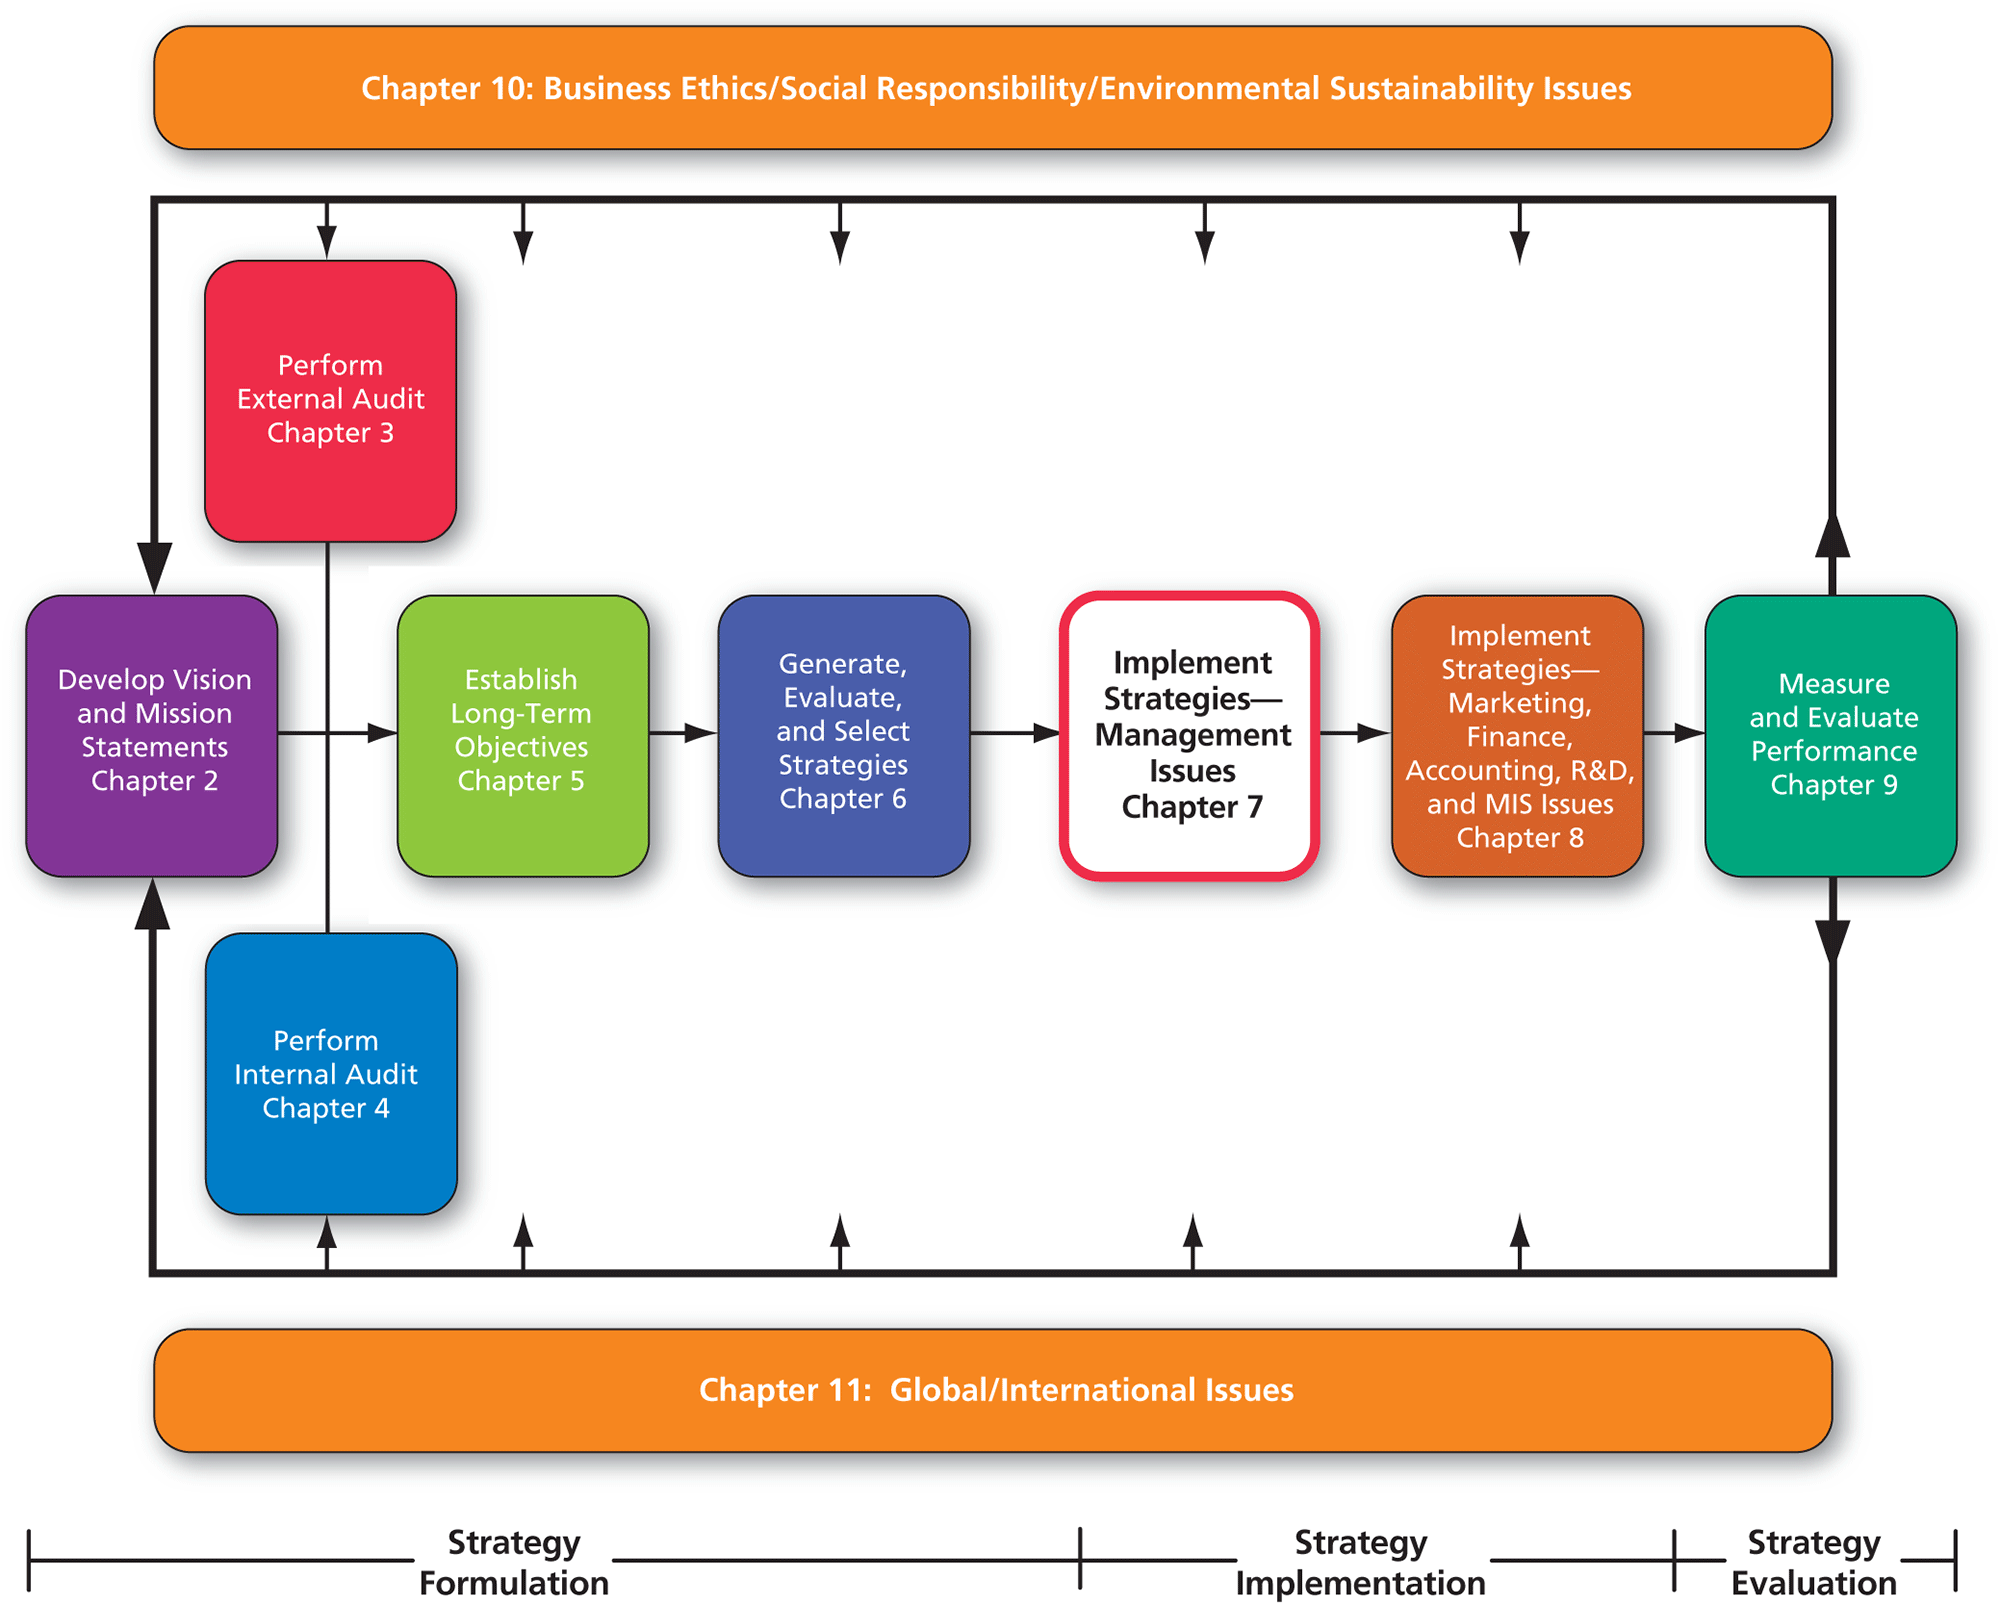 A chart illustrates the Comprehensive Strategic Management Model. In the image, the step, “Implement Strategies&#x2014;Management Issues (Chapter 7)” is highlighted.